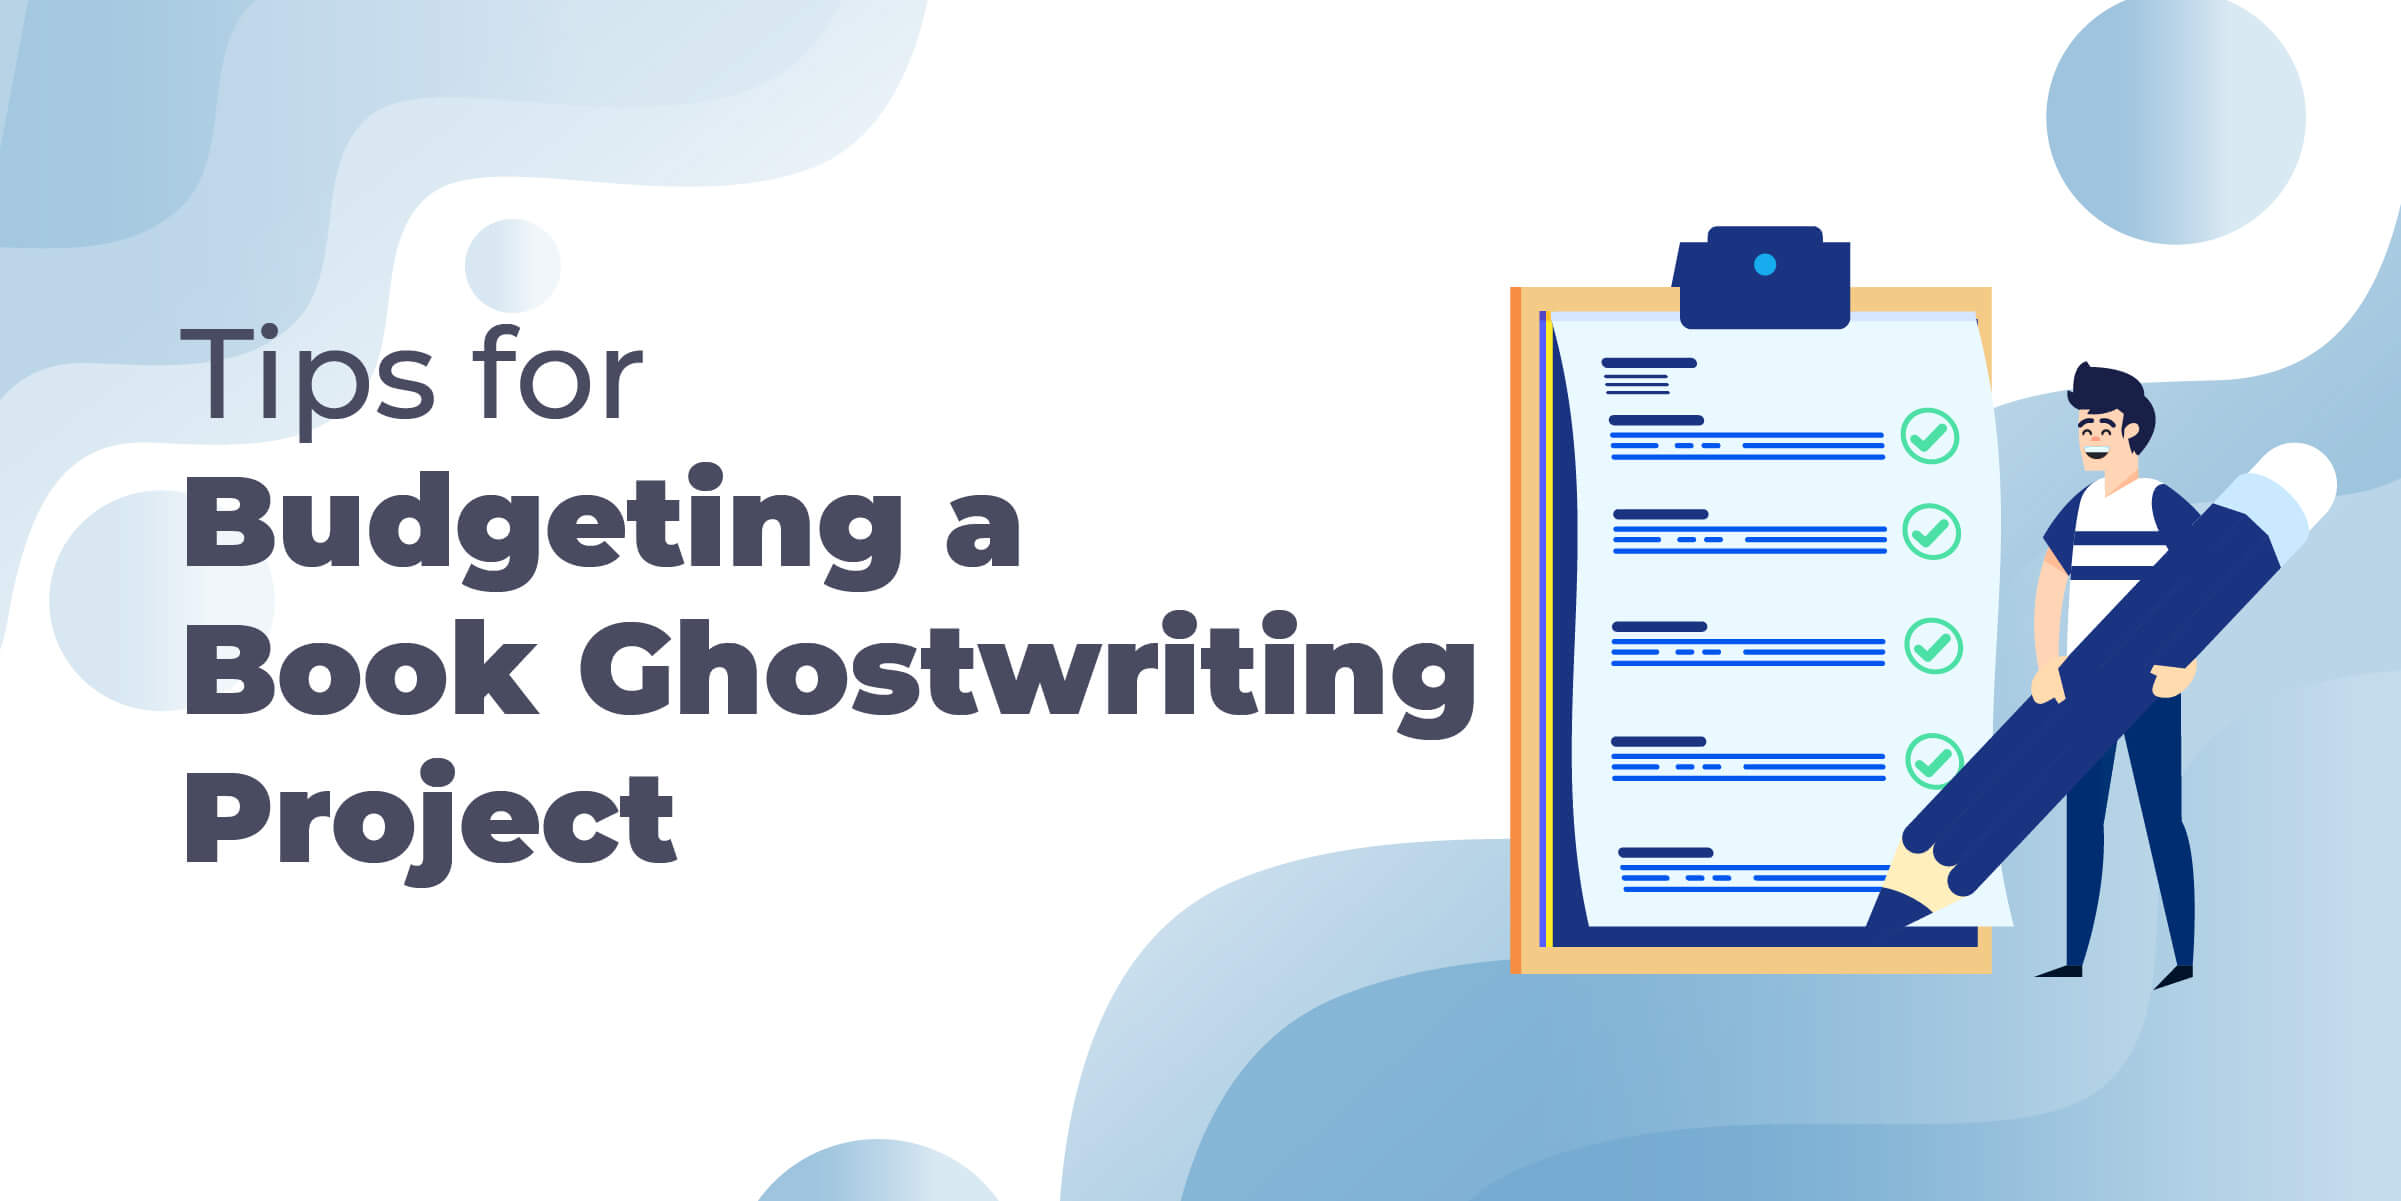 Tips for Budgeting Book Ghostwriting Project